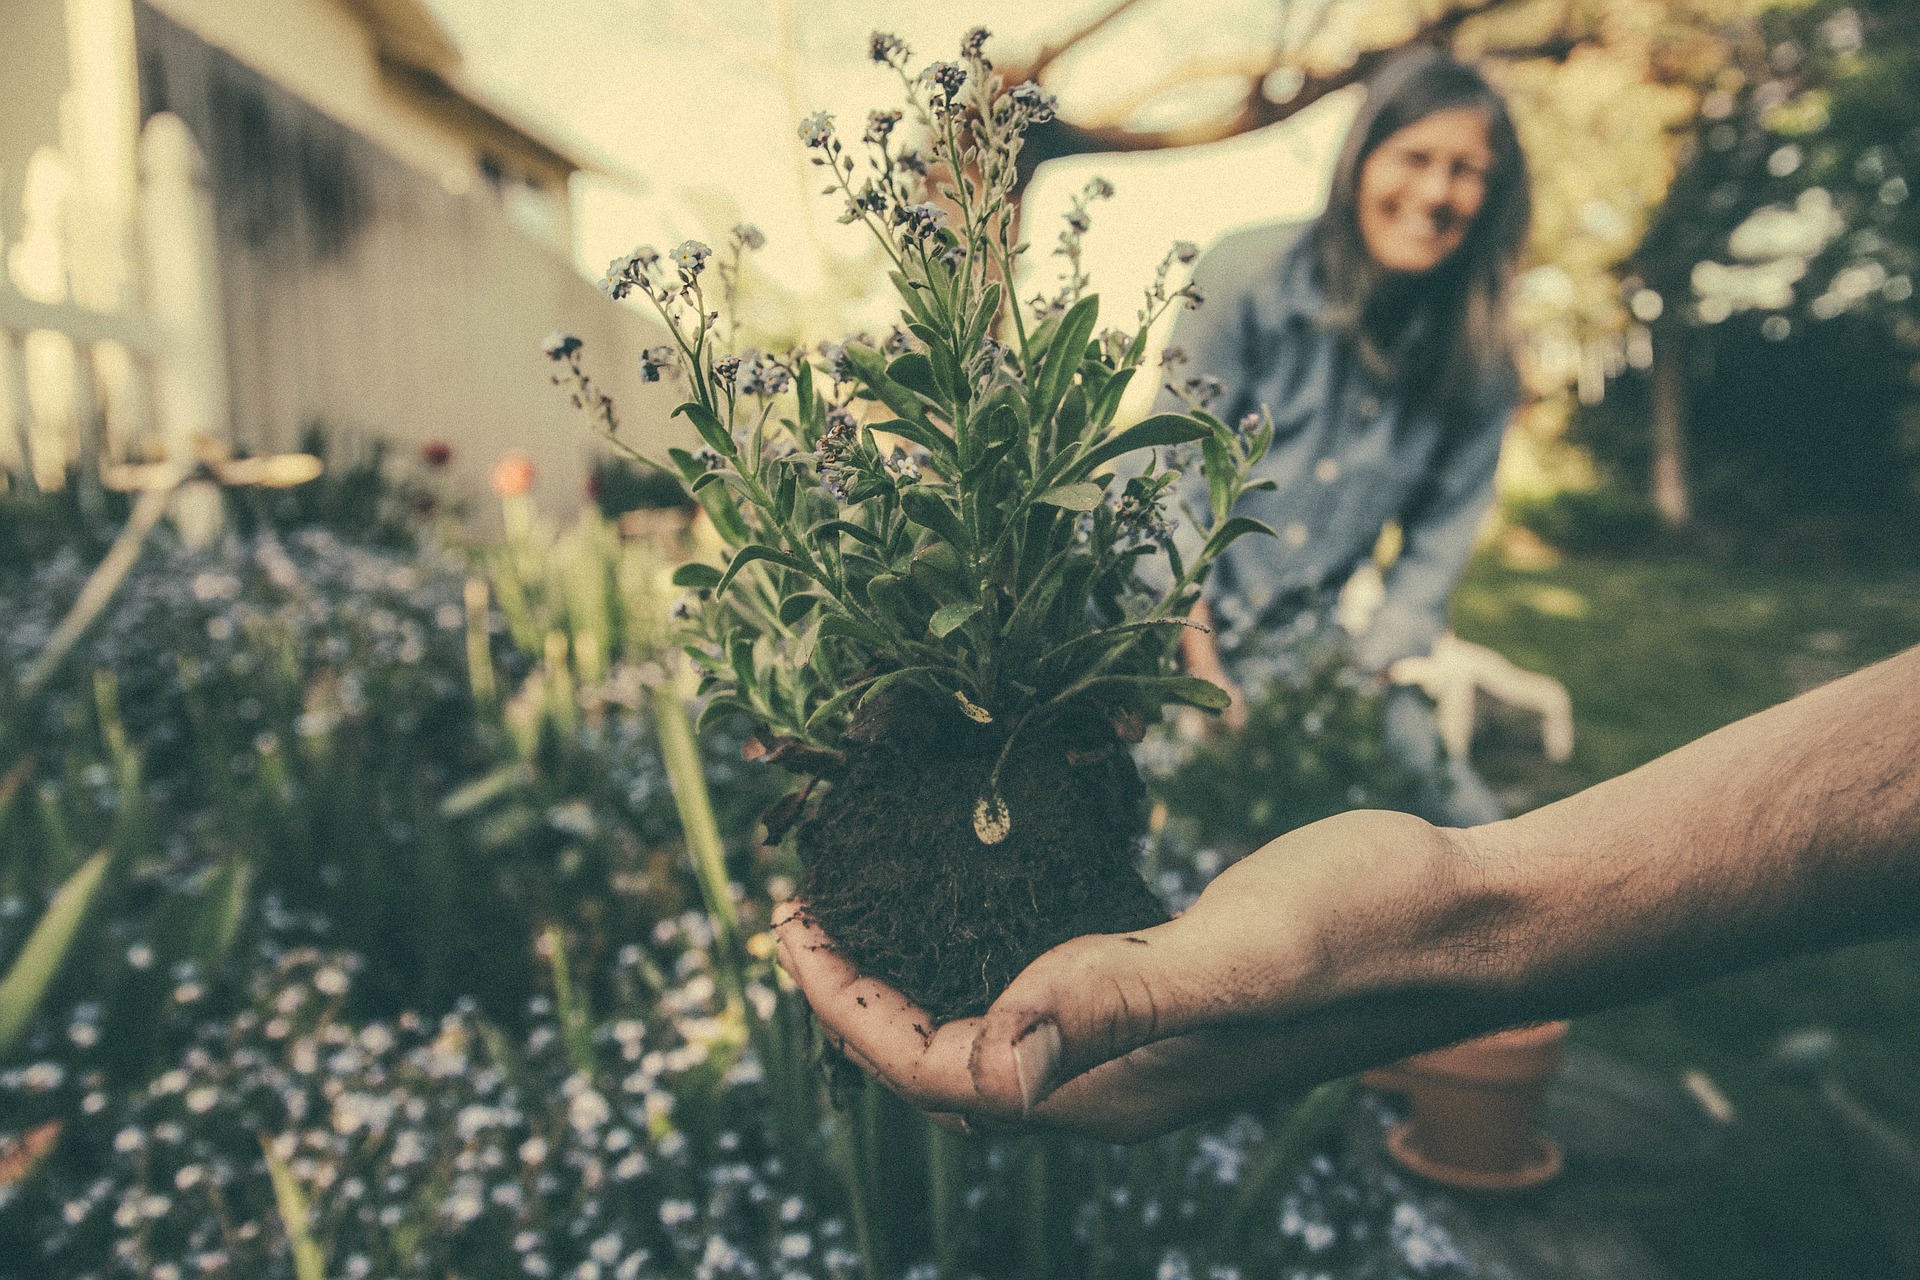 gardening hobby; hand holding a plant before planting in the ground. woman smiling in the background